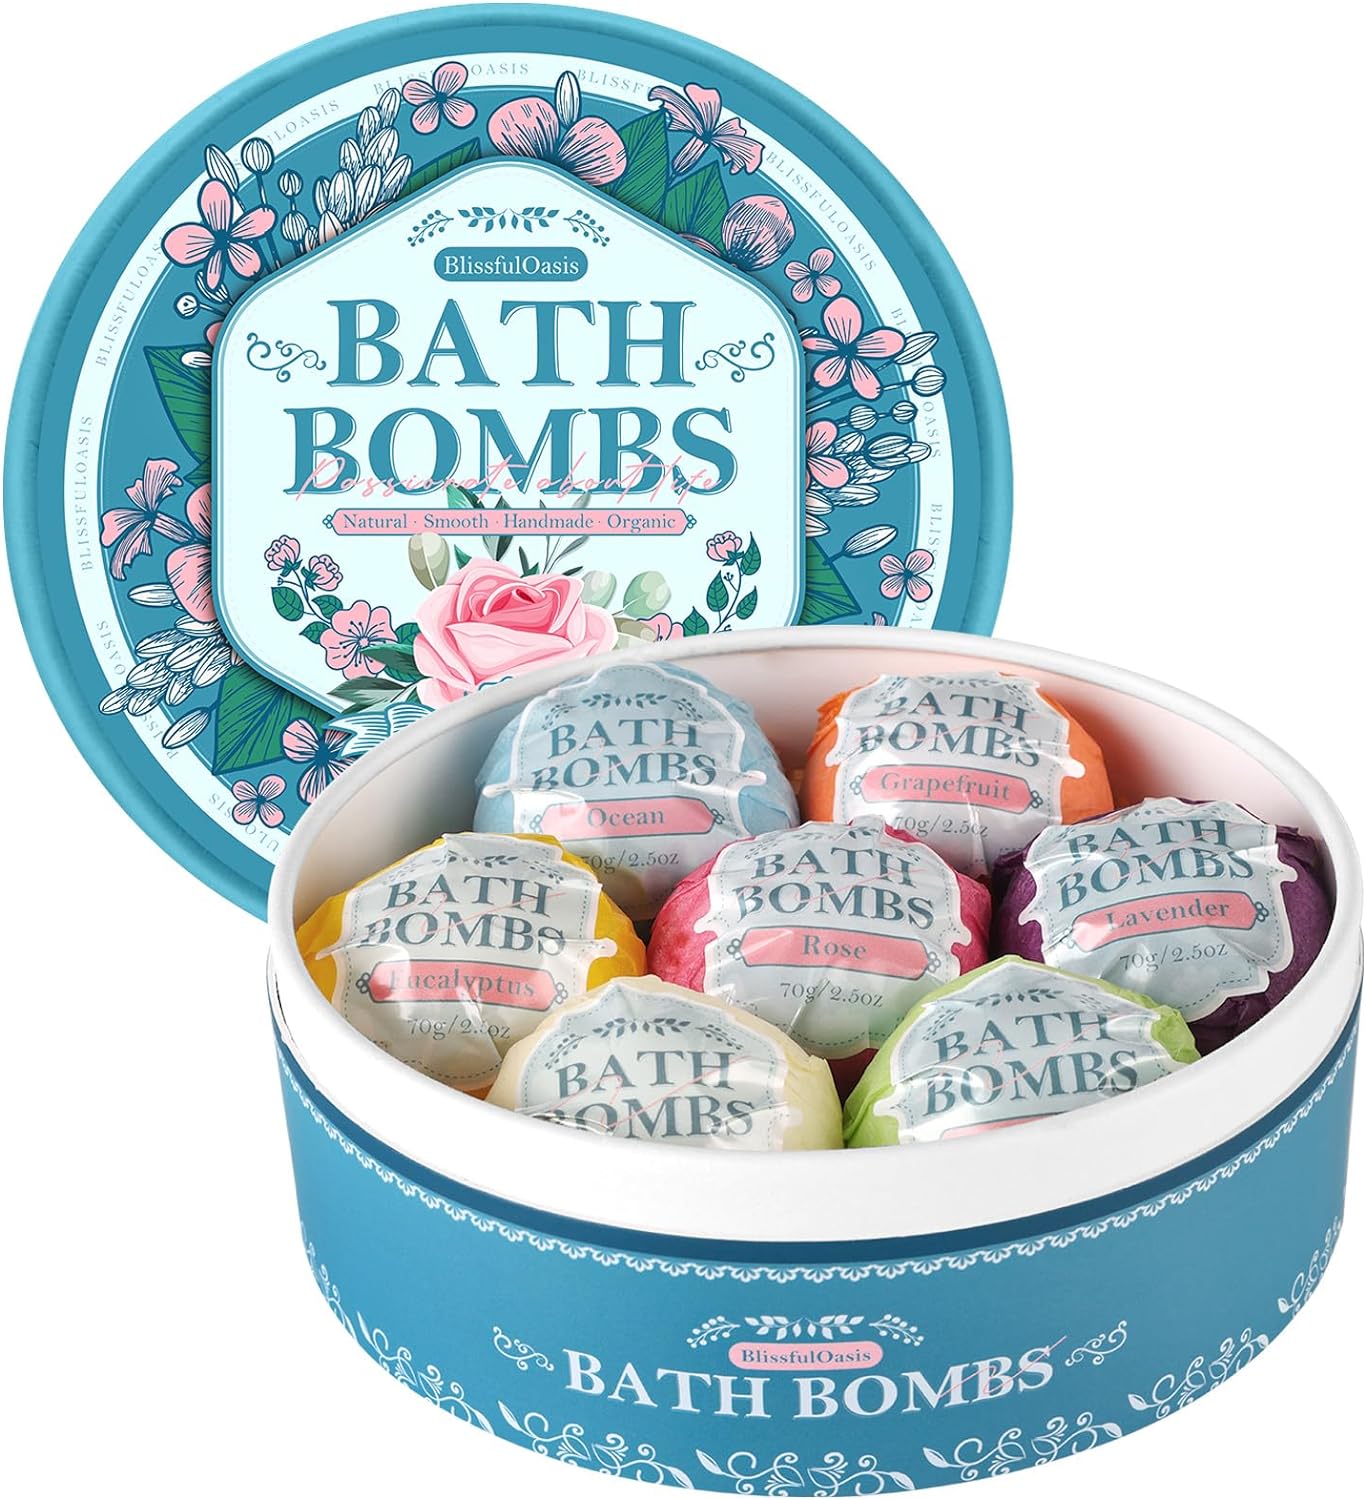 blissful oasis, one of the best bath bombs